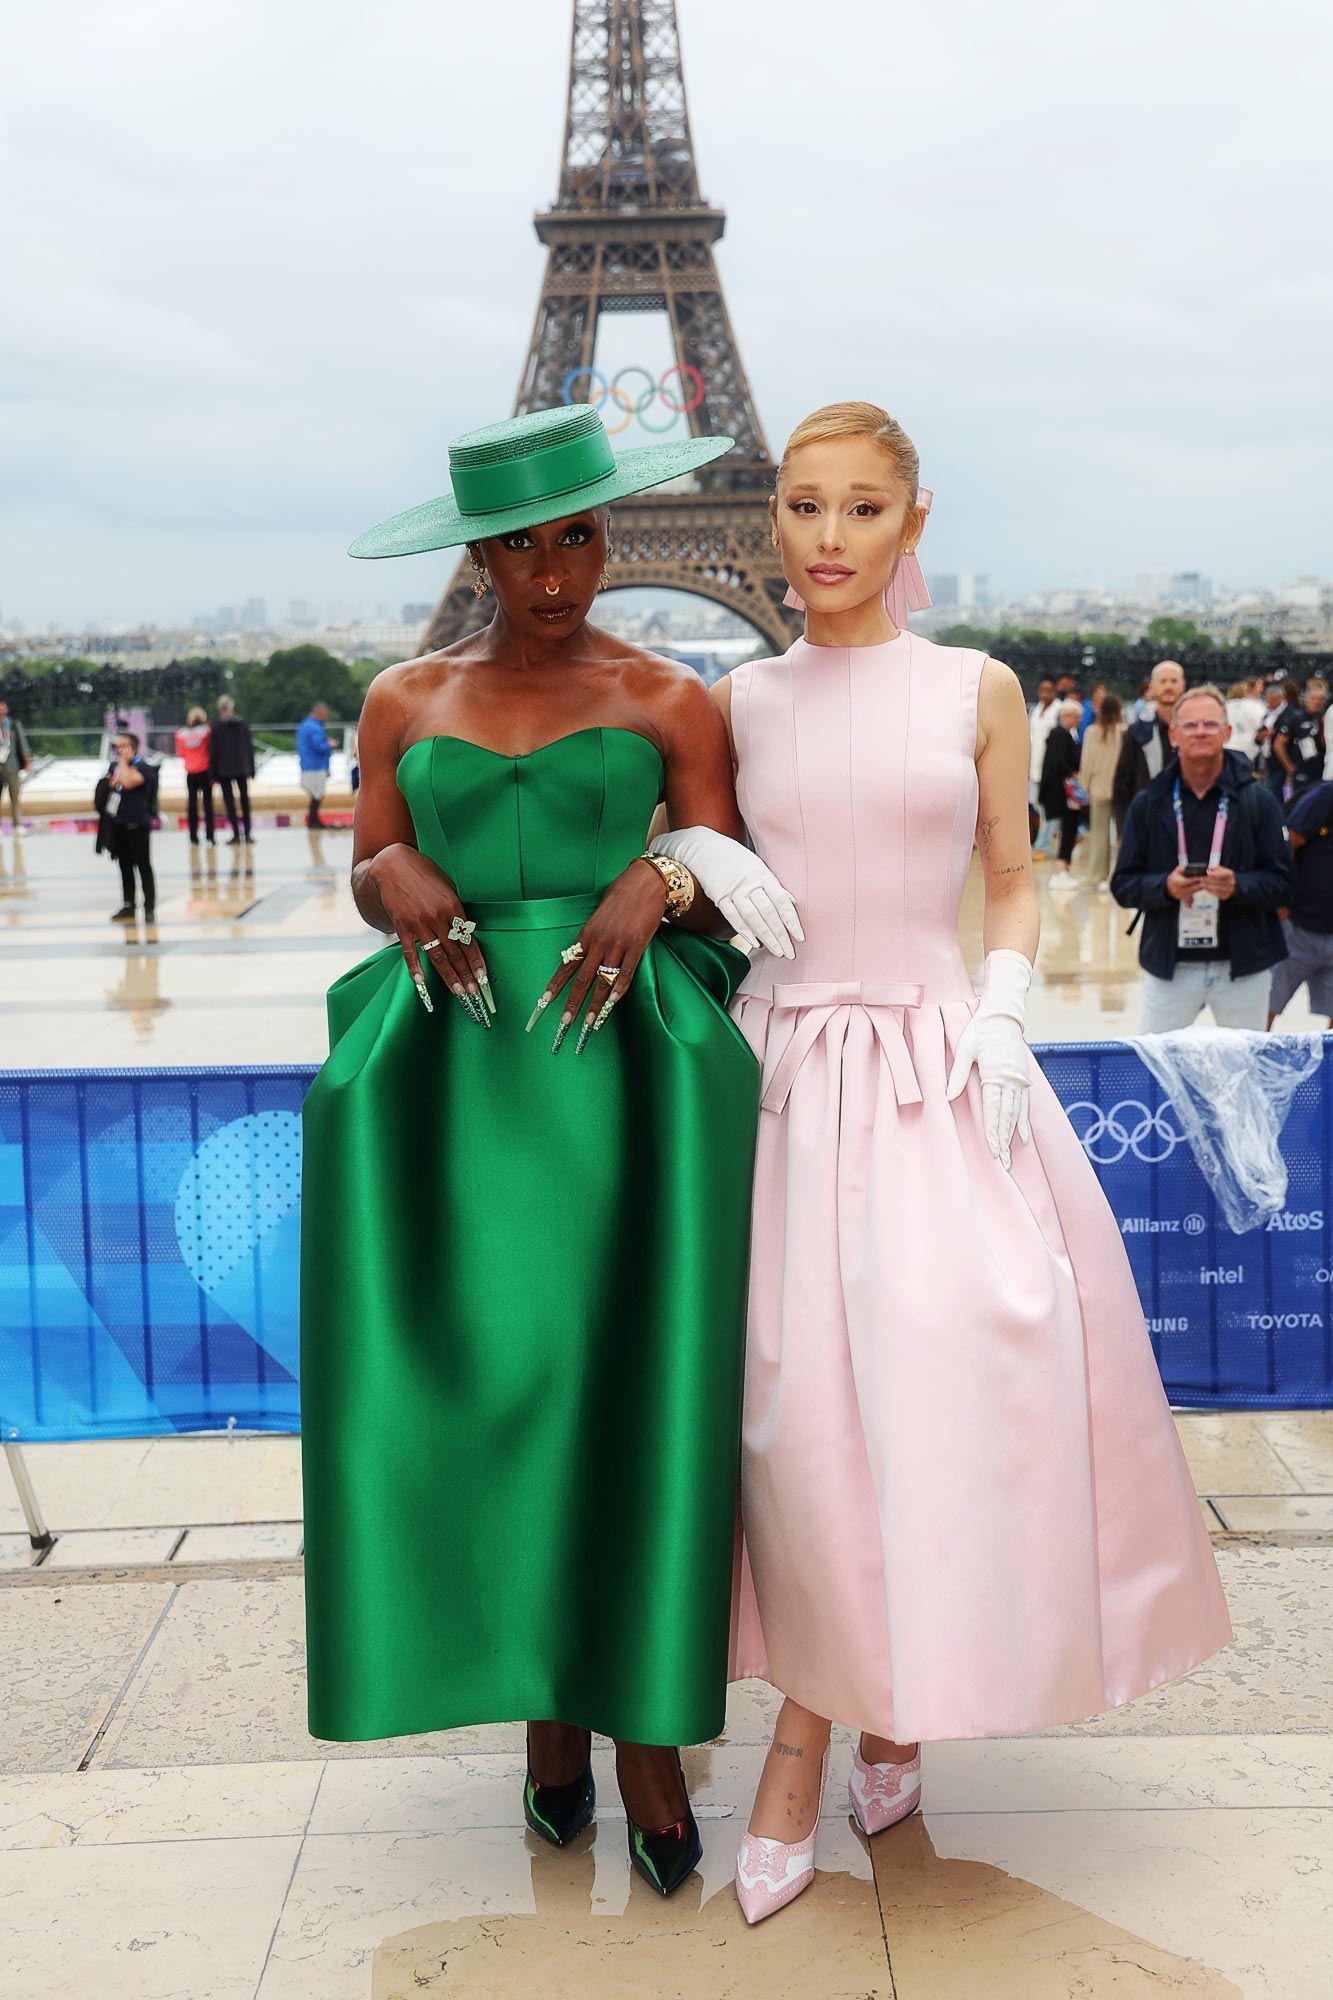 Ariana Grande and Cynthia Erivo Are Wickedly Stunning at 2024 Paris Olympics 306